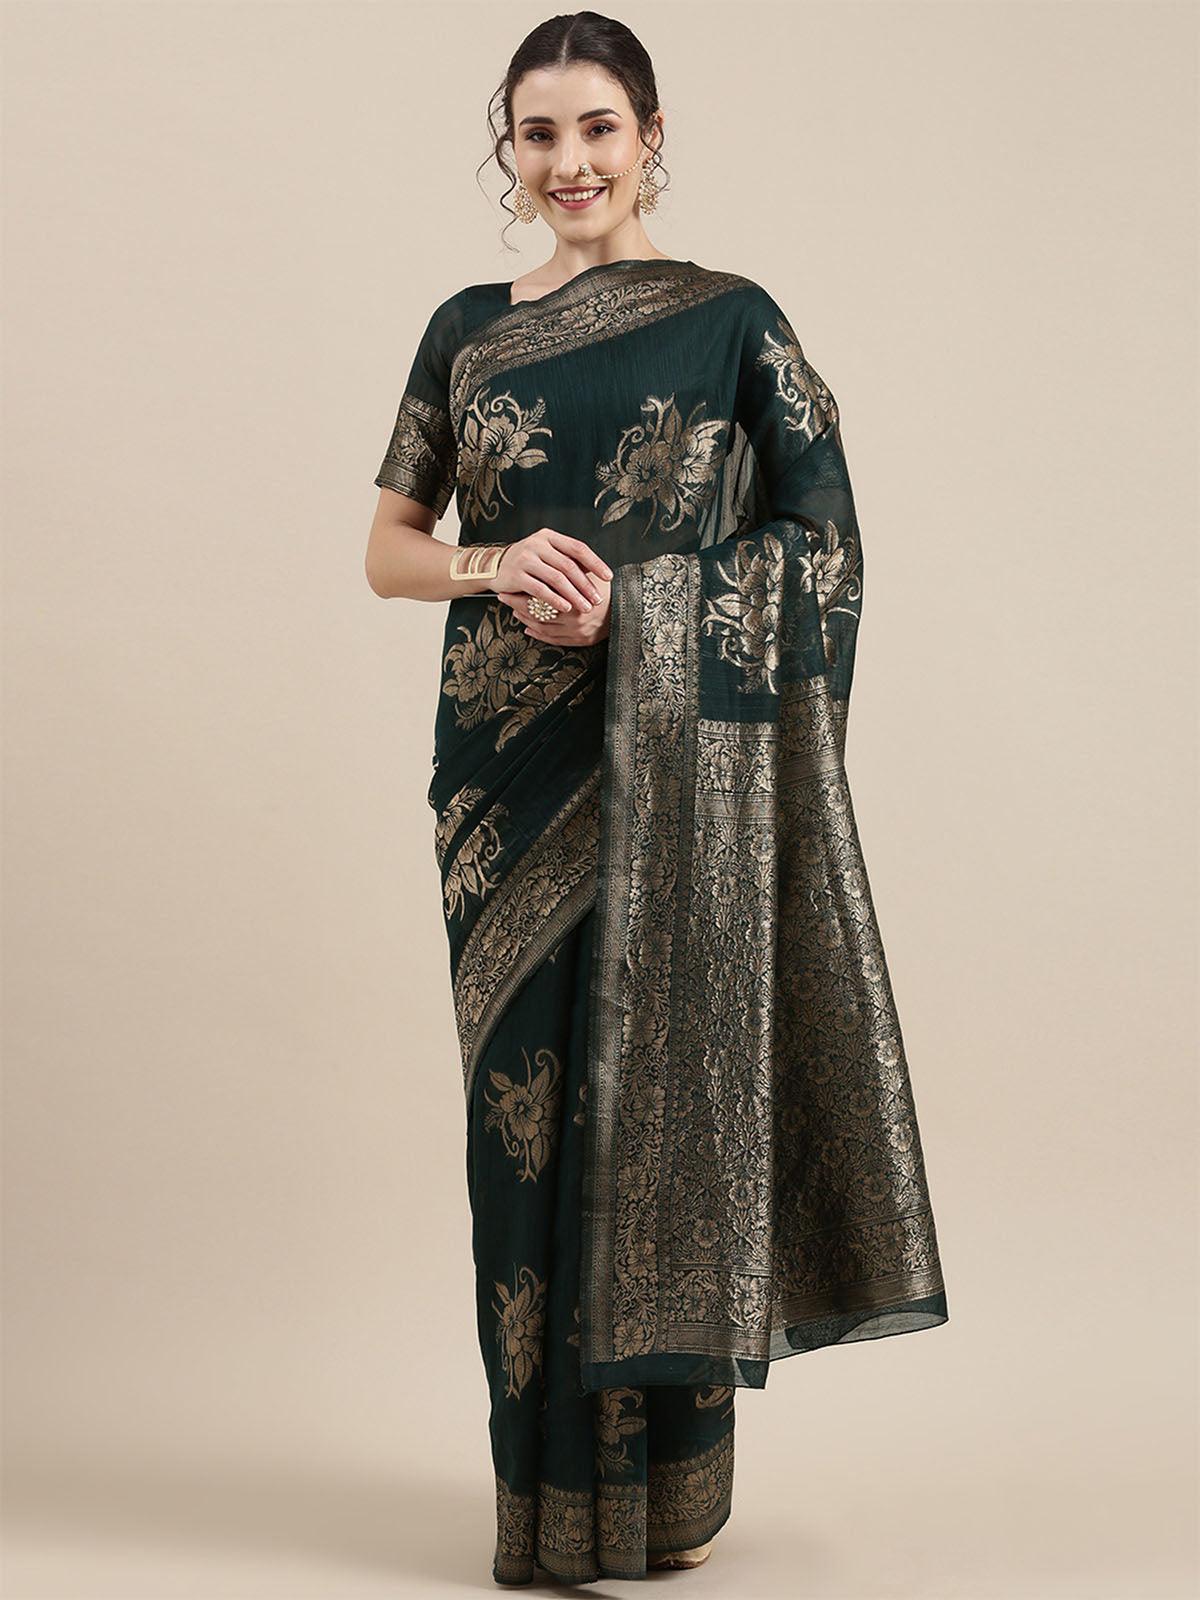 Women's Linen Teal Green Woven Design Woven Saree With Blouse Piece - Odette